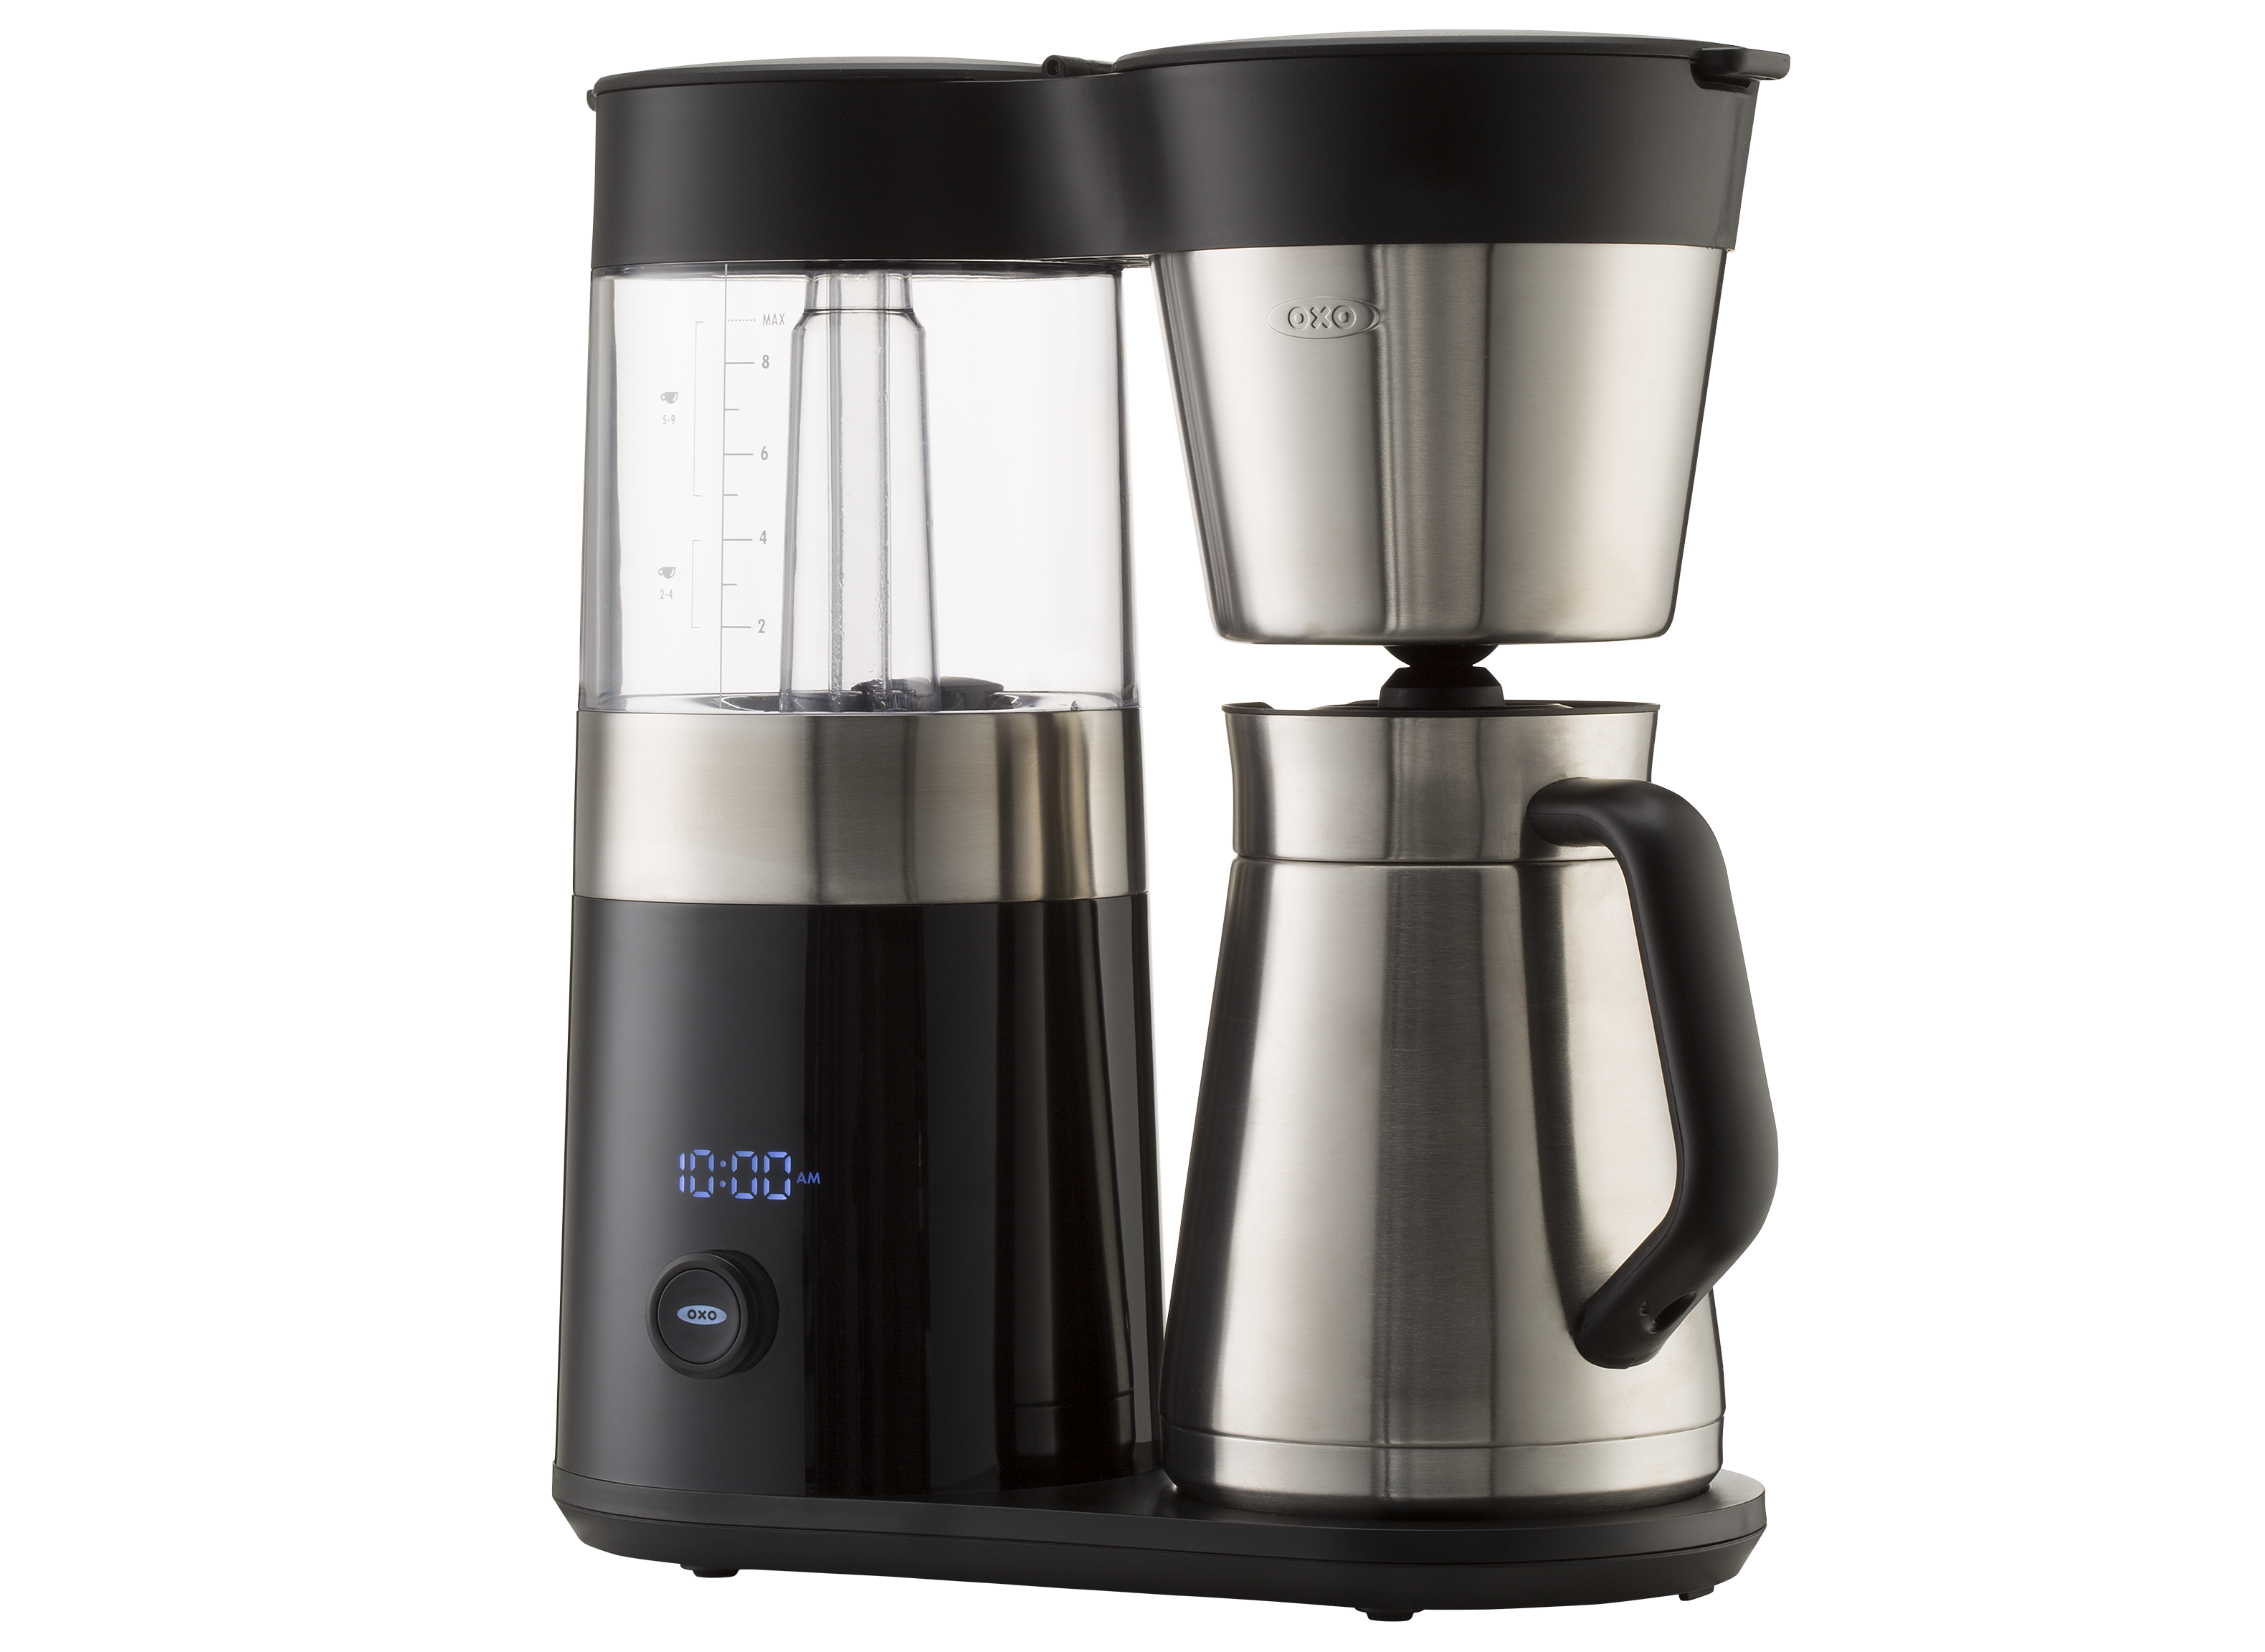 https://crdms.images.consumerreports.org/prod/products/cr/models/384632-coffeemakers-oxo-baristabrain9cup8710100.png